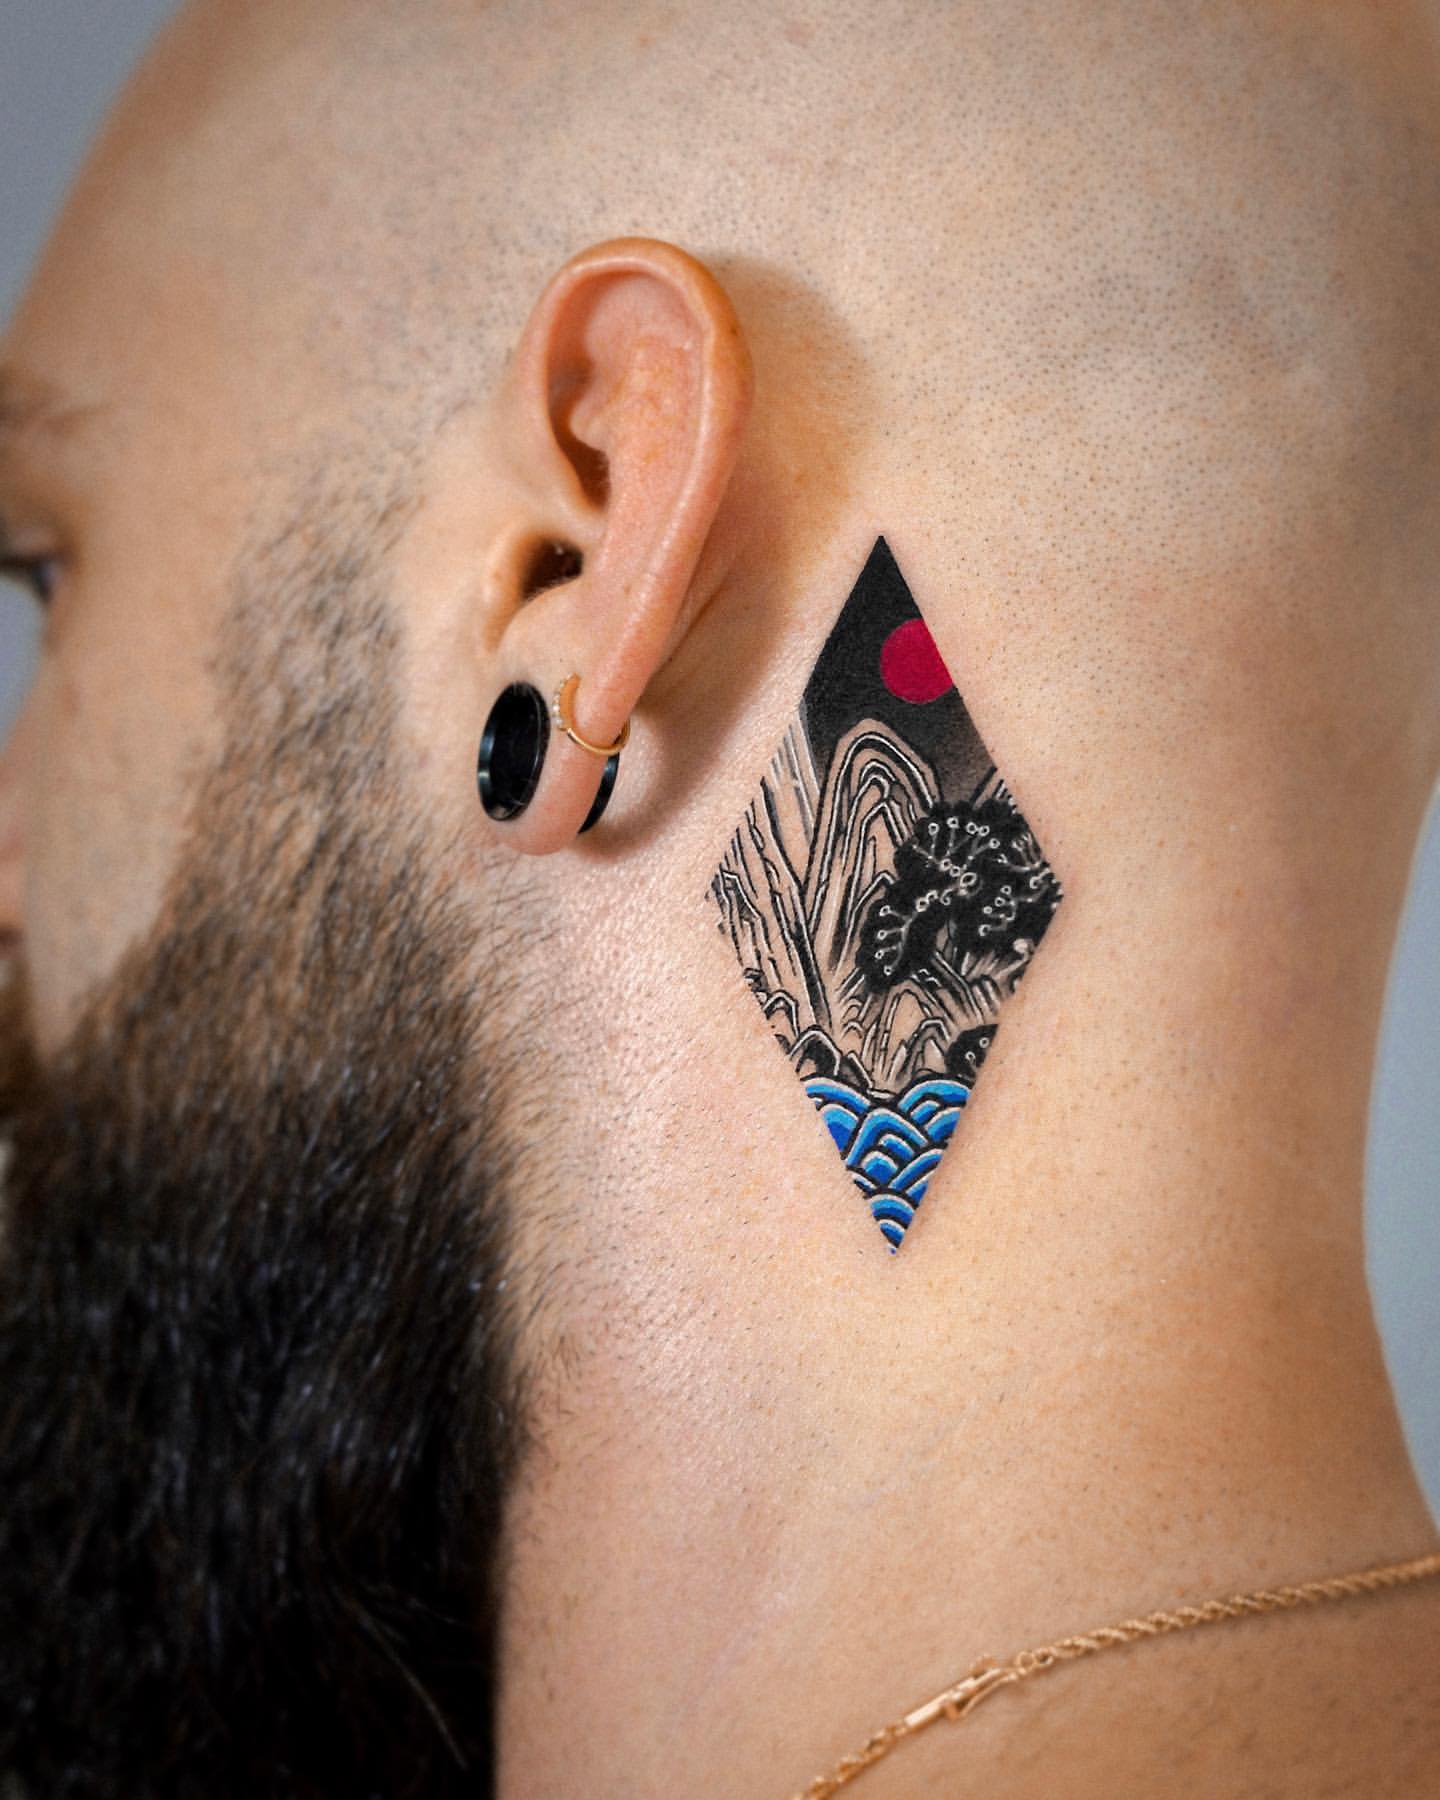 Behind the Ear Tattoos for Men 13